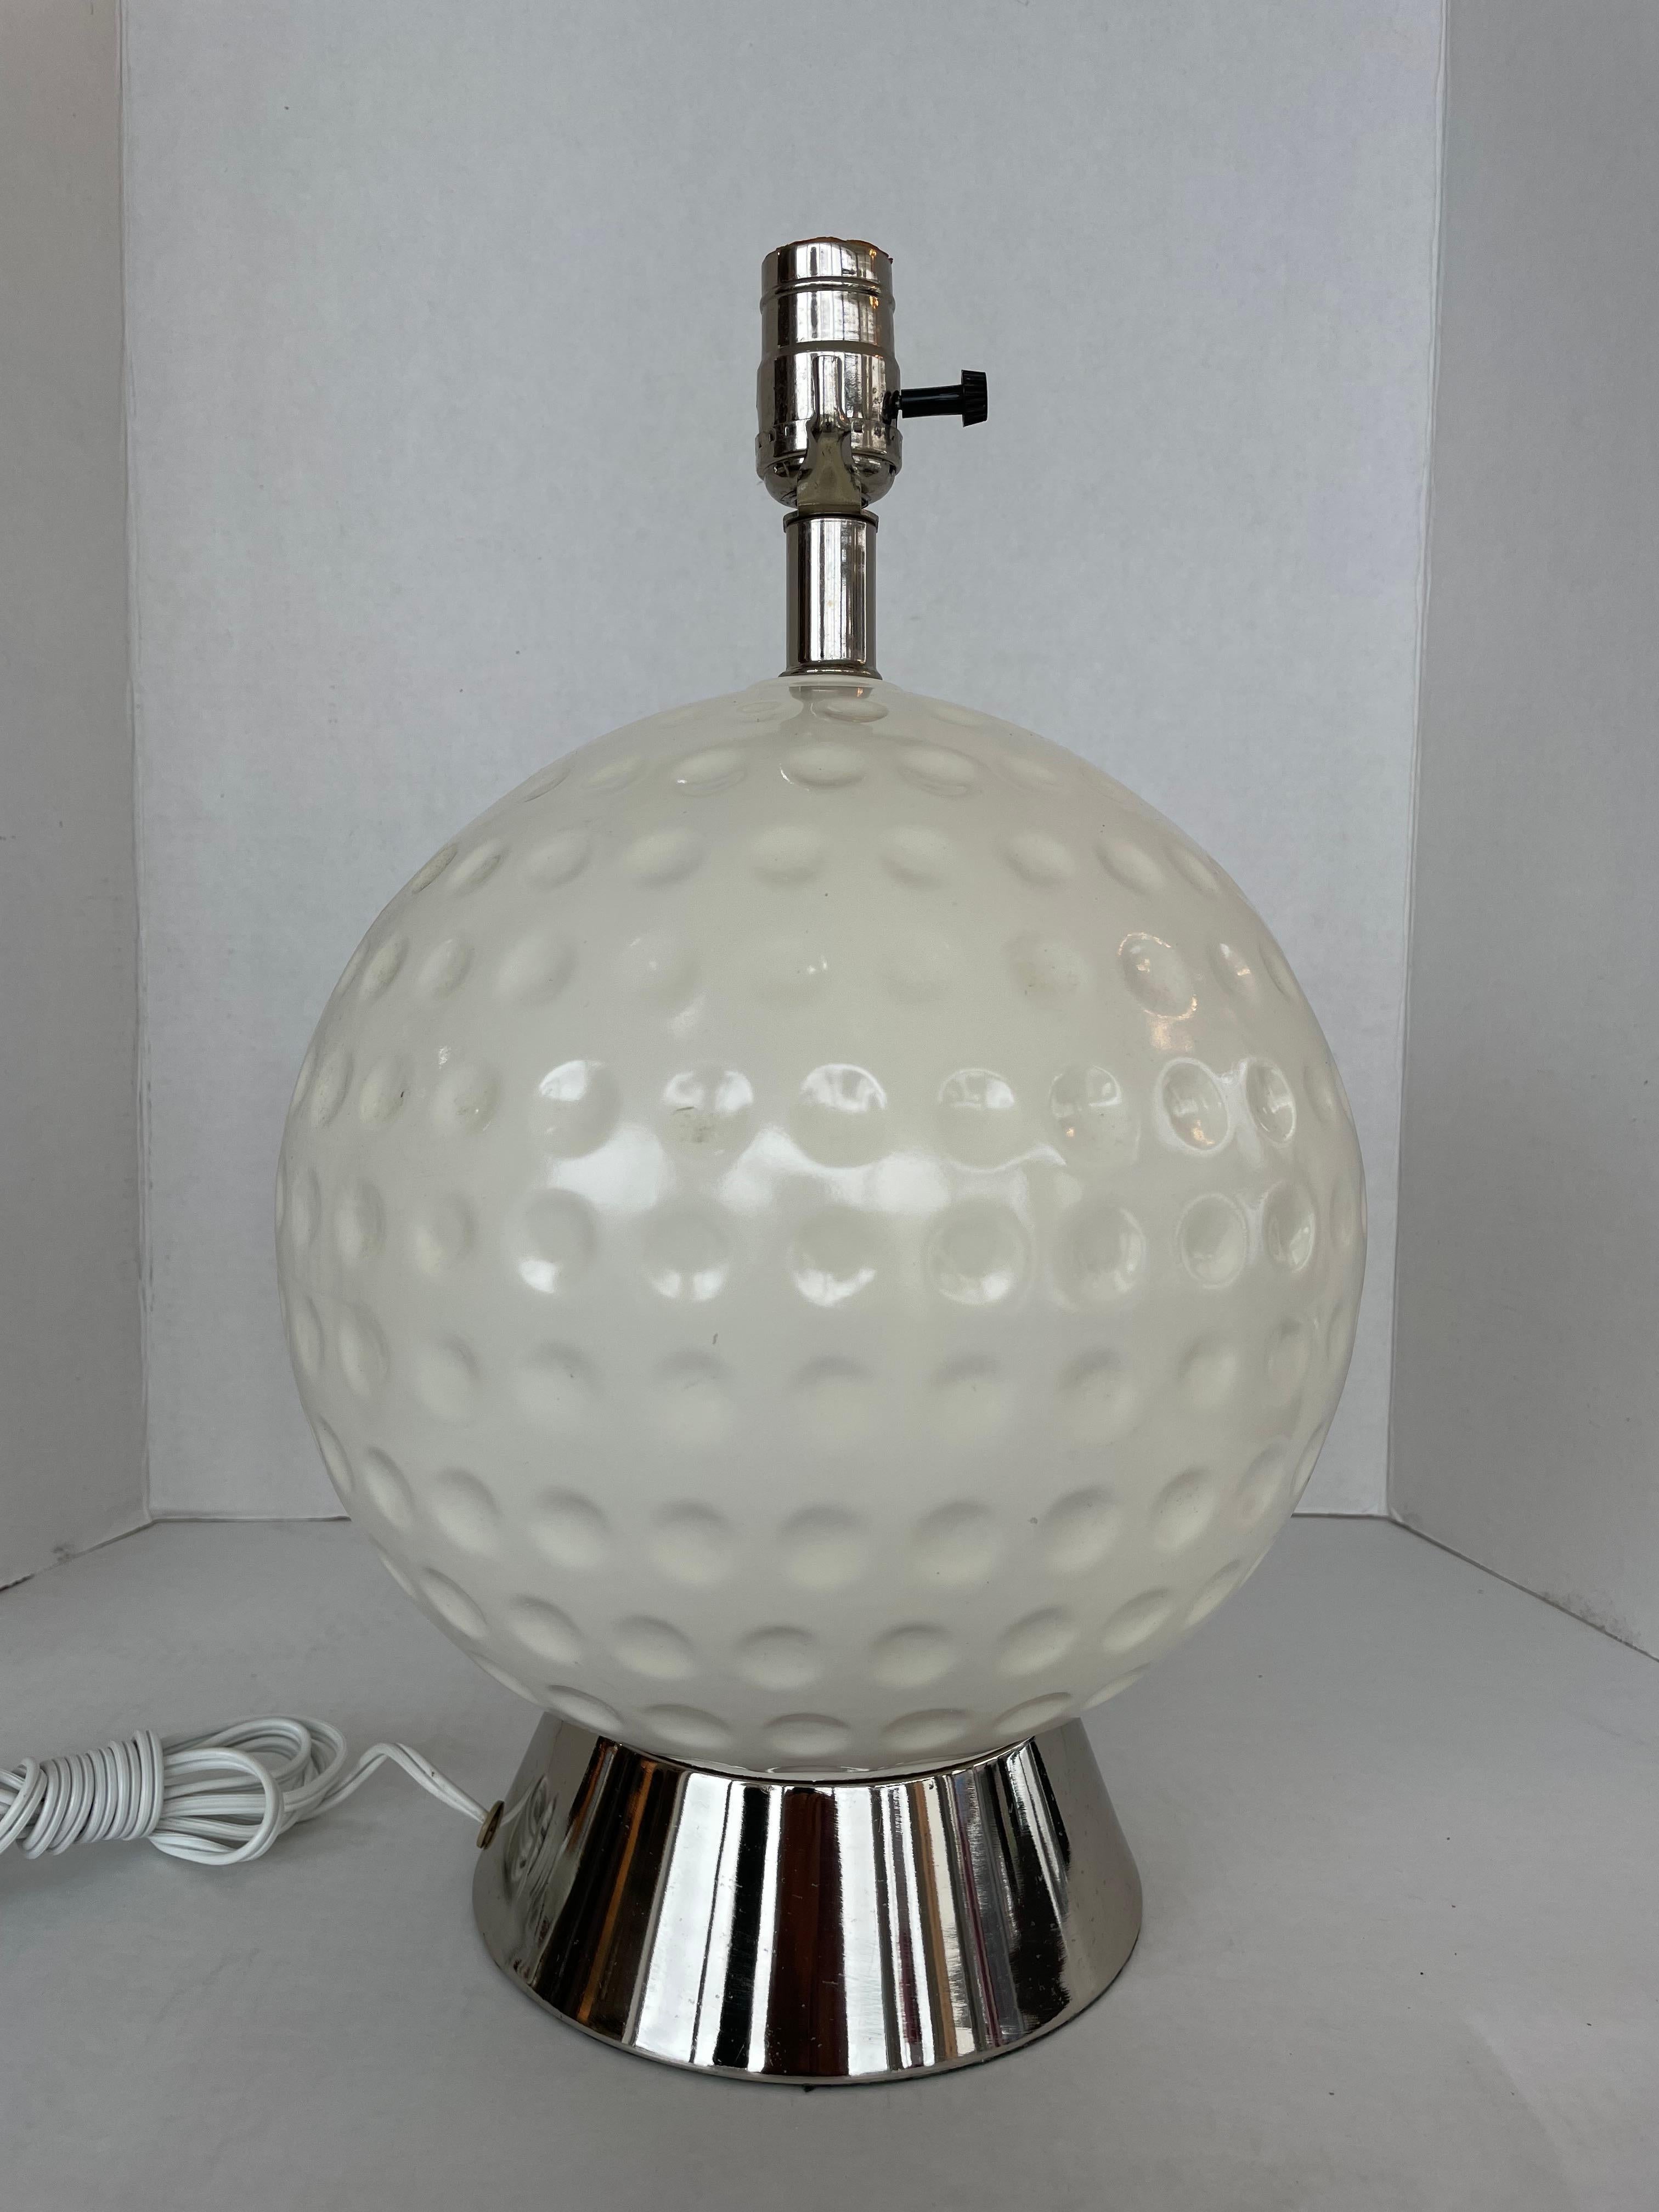 This stylish and chic table lamp dates to the 1970s and is very much in the mod feel of that time period.

The piece is fabricated in a glazed ceramic with a polished chrome base and hardware.

Note: Requires one Edison based light bulb.

Note: